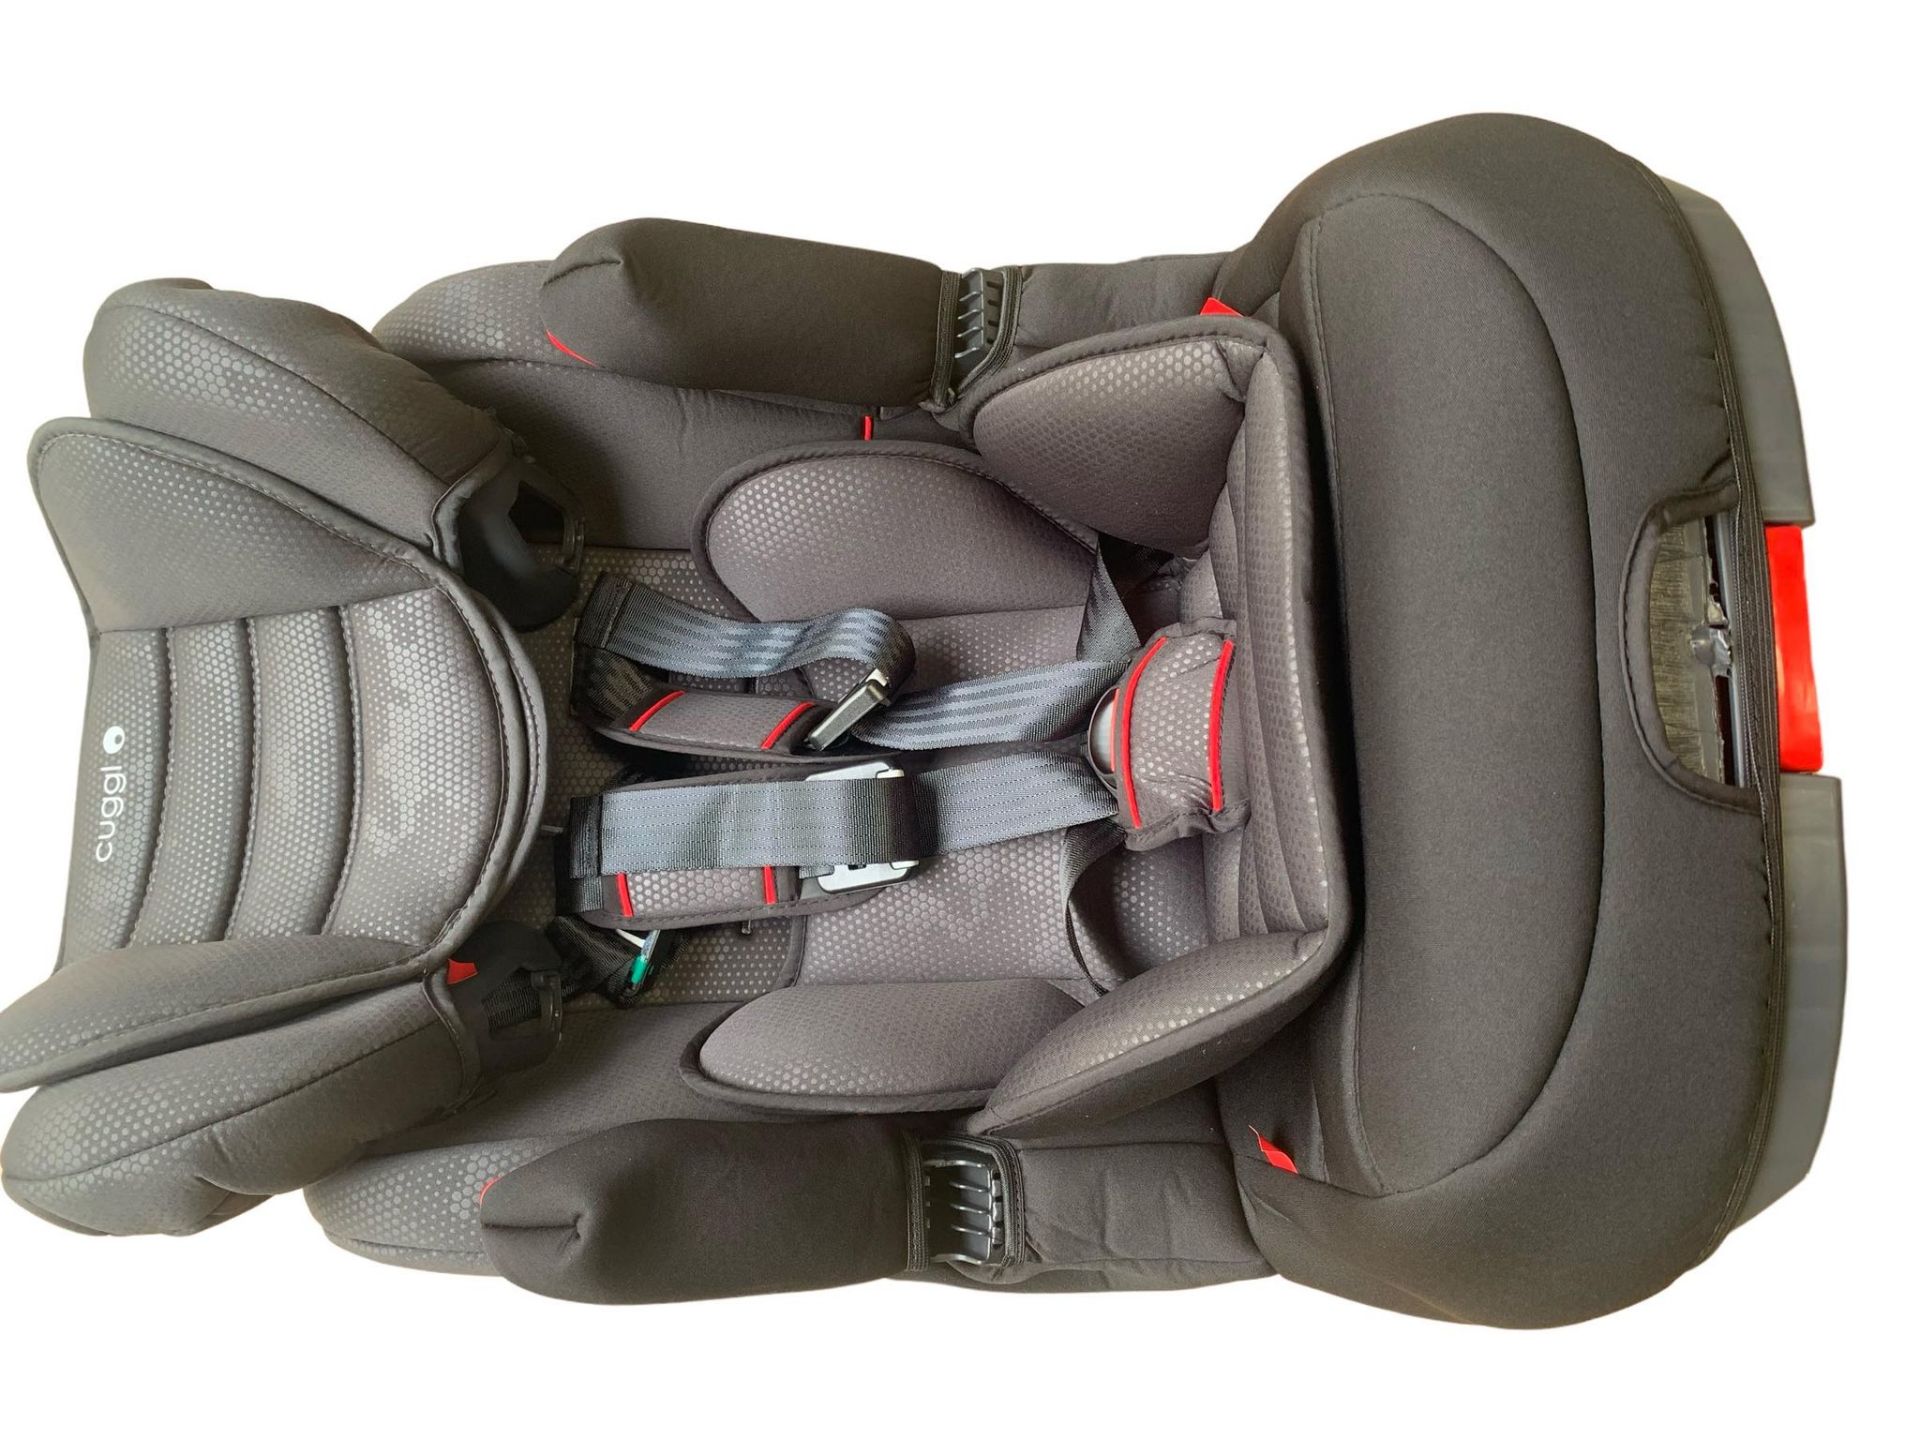 BRAND NEW CUGGL LINNET GROUP 1/2/3 ISOFIX CAR SEAT - Image 4 of 6